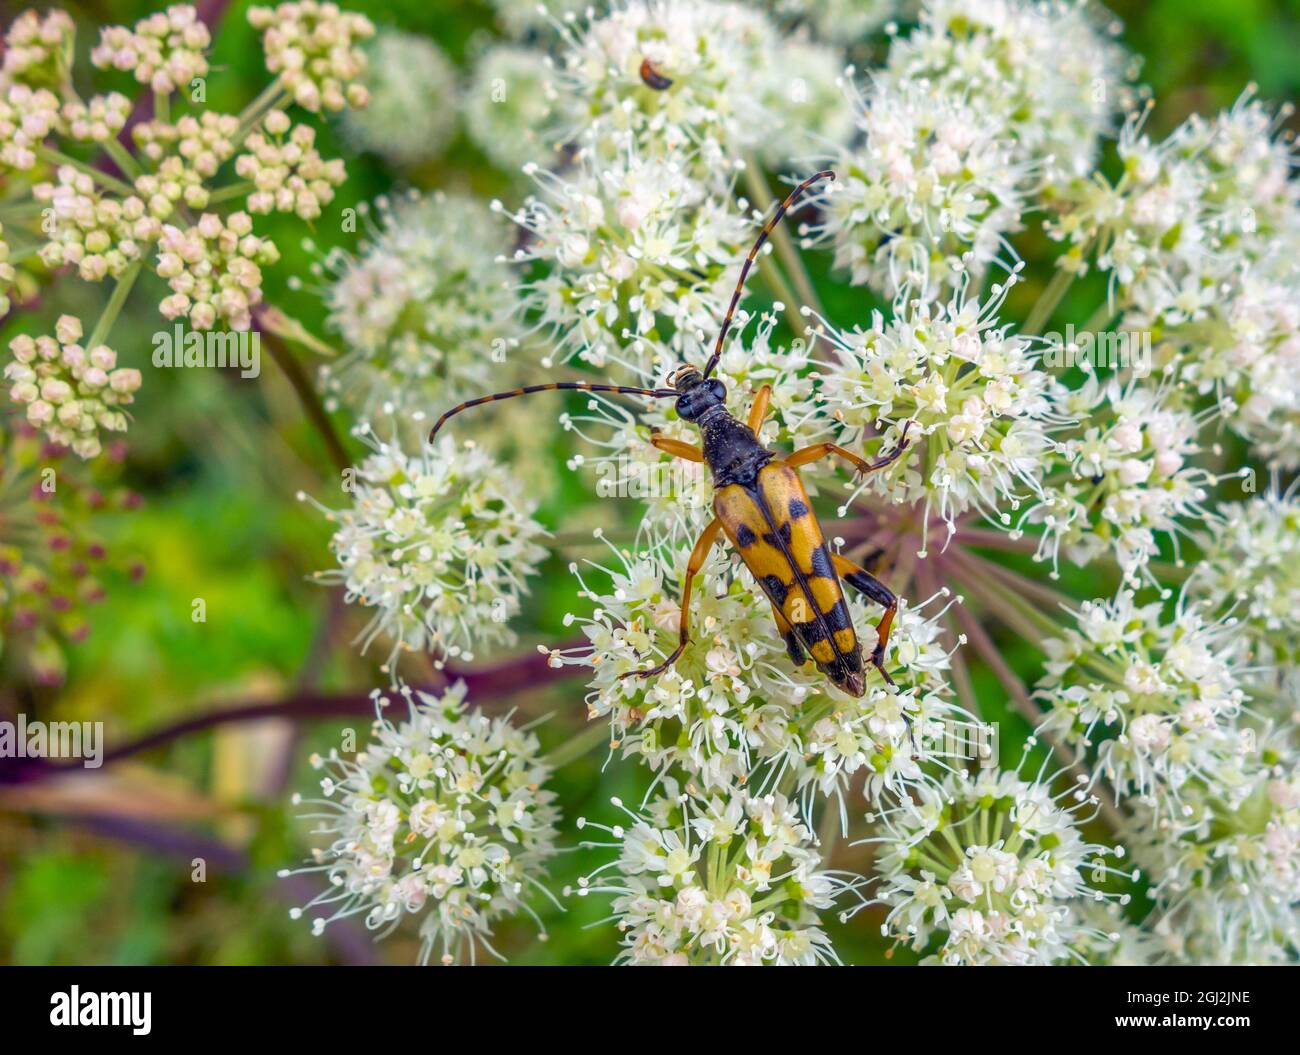 Four-banded longhorn beetle on white flower head in natural ambiance Stock Photo